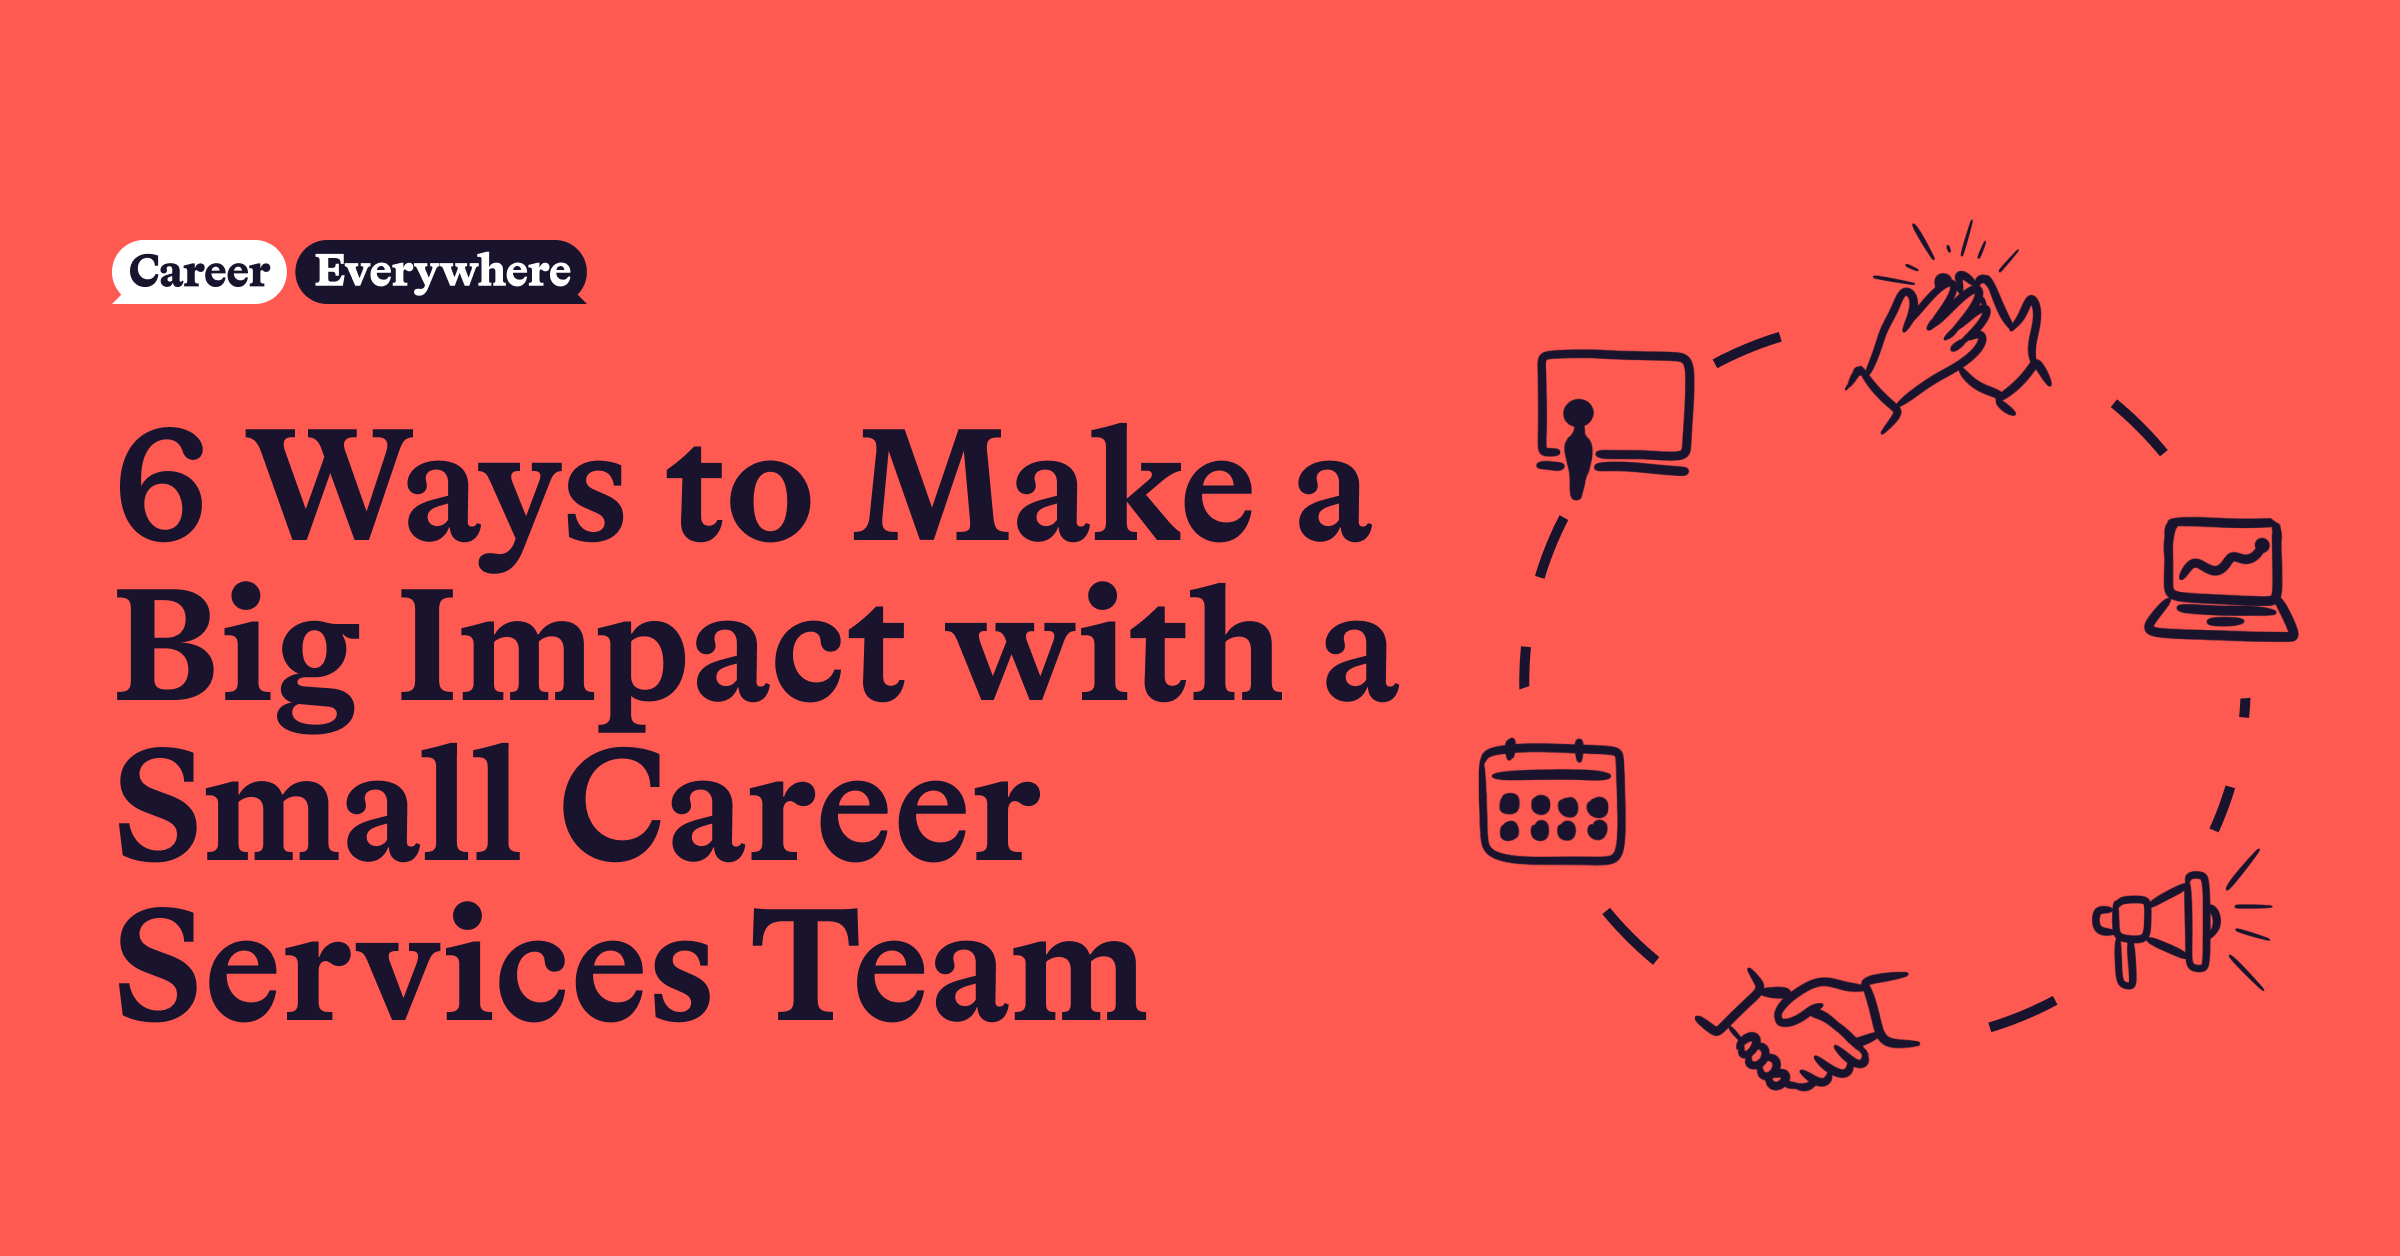 6 Ways to Make a Big Impact with a Small Career Services Team